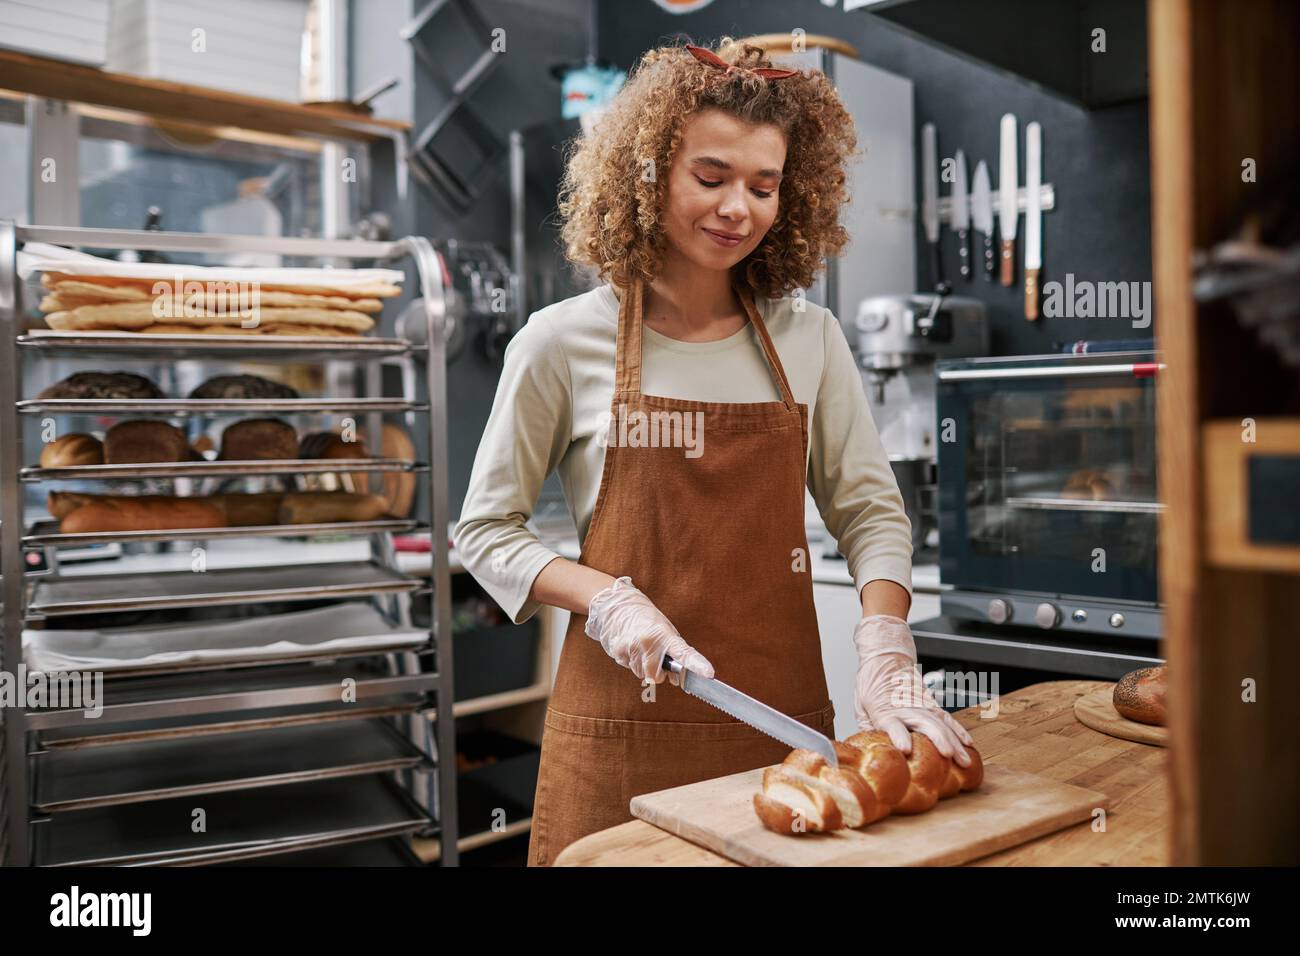 Smiling baker wearing gloves when cutting bread for customers Stock Photo